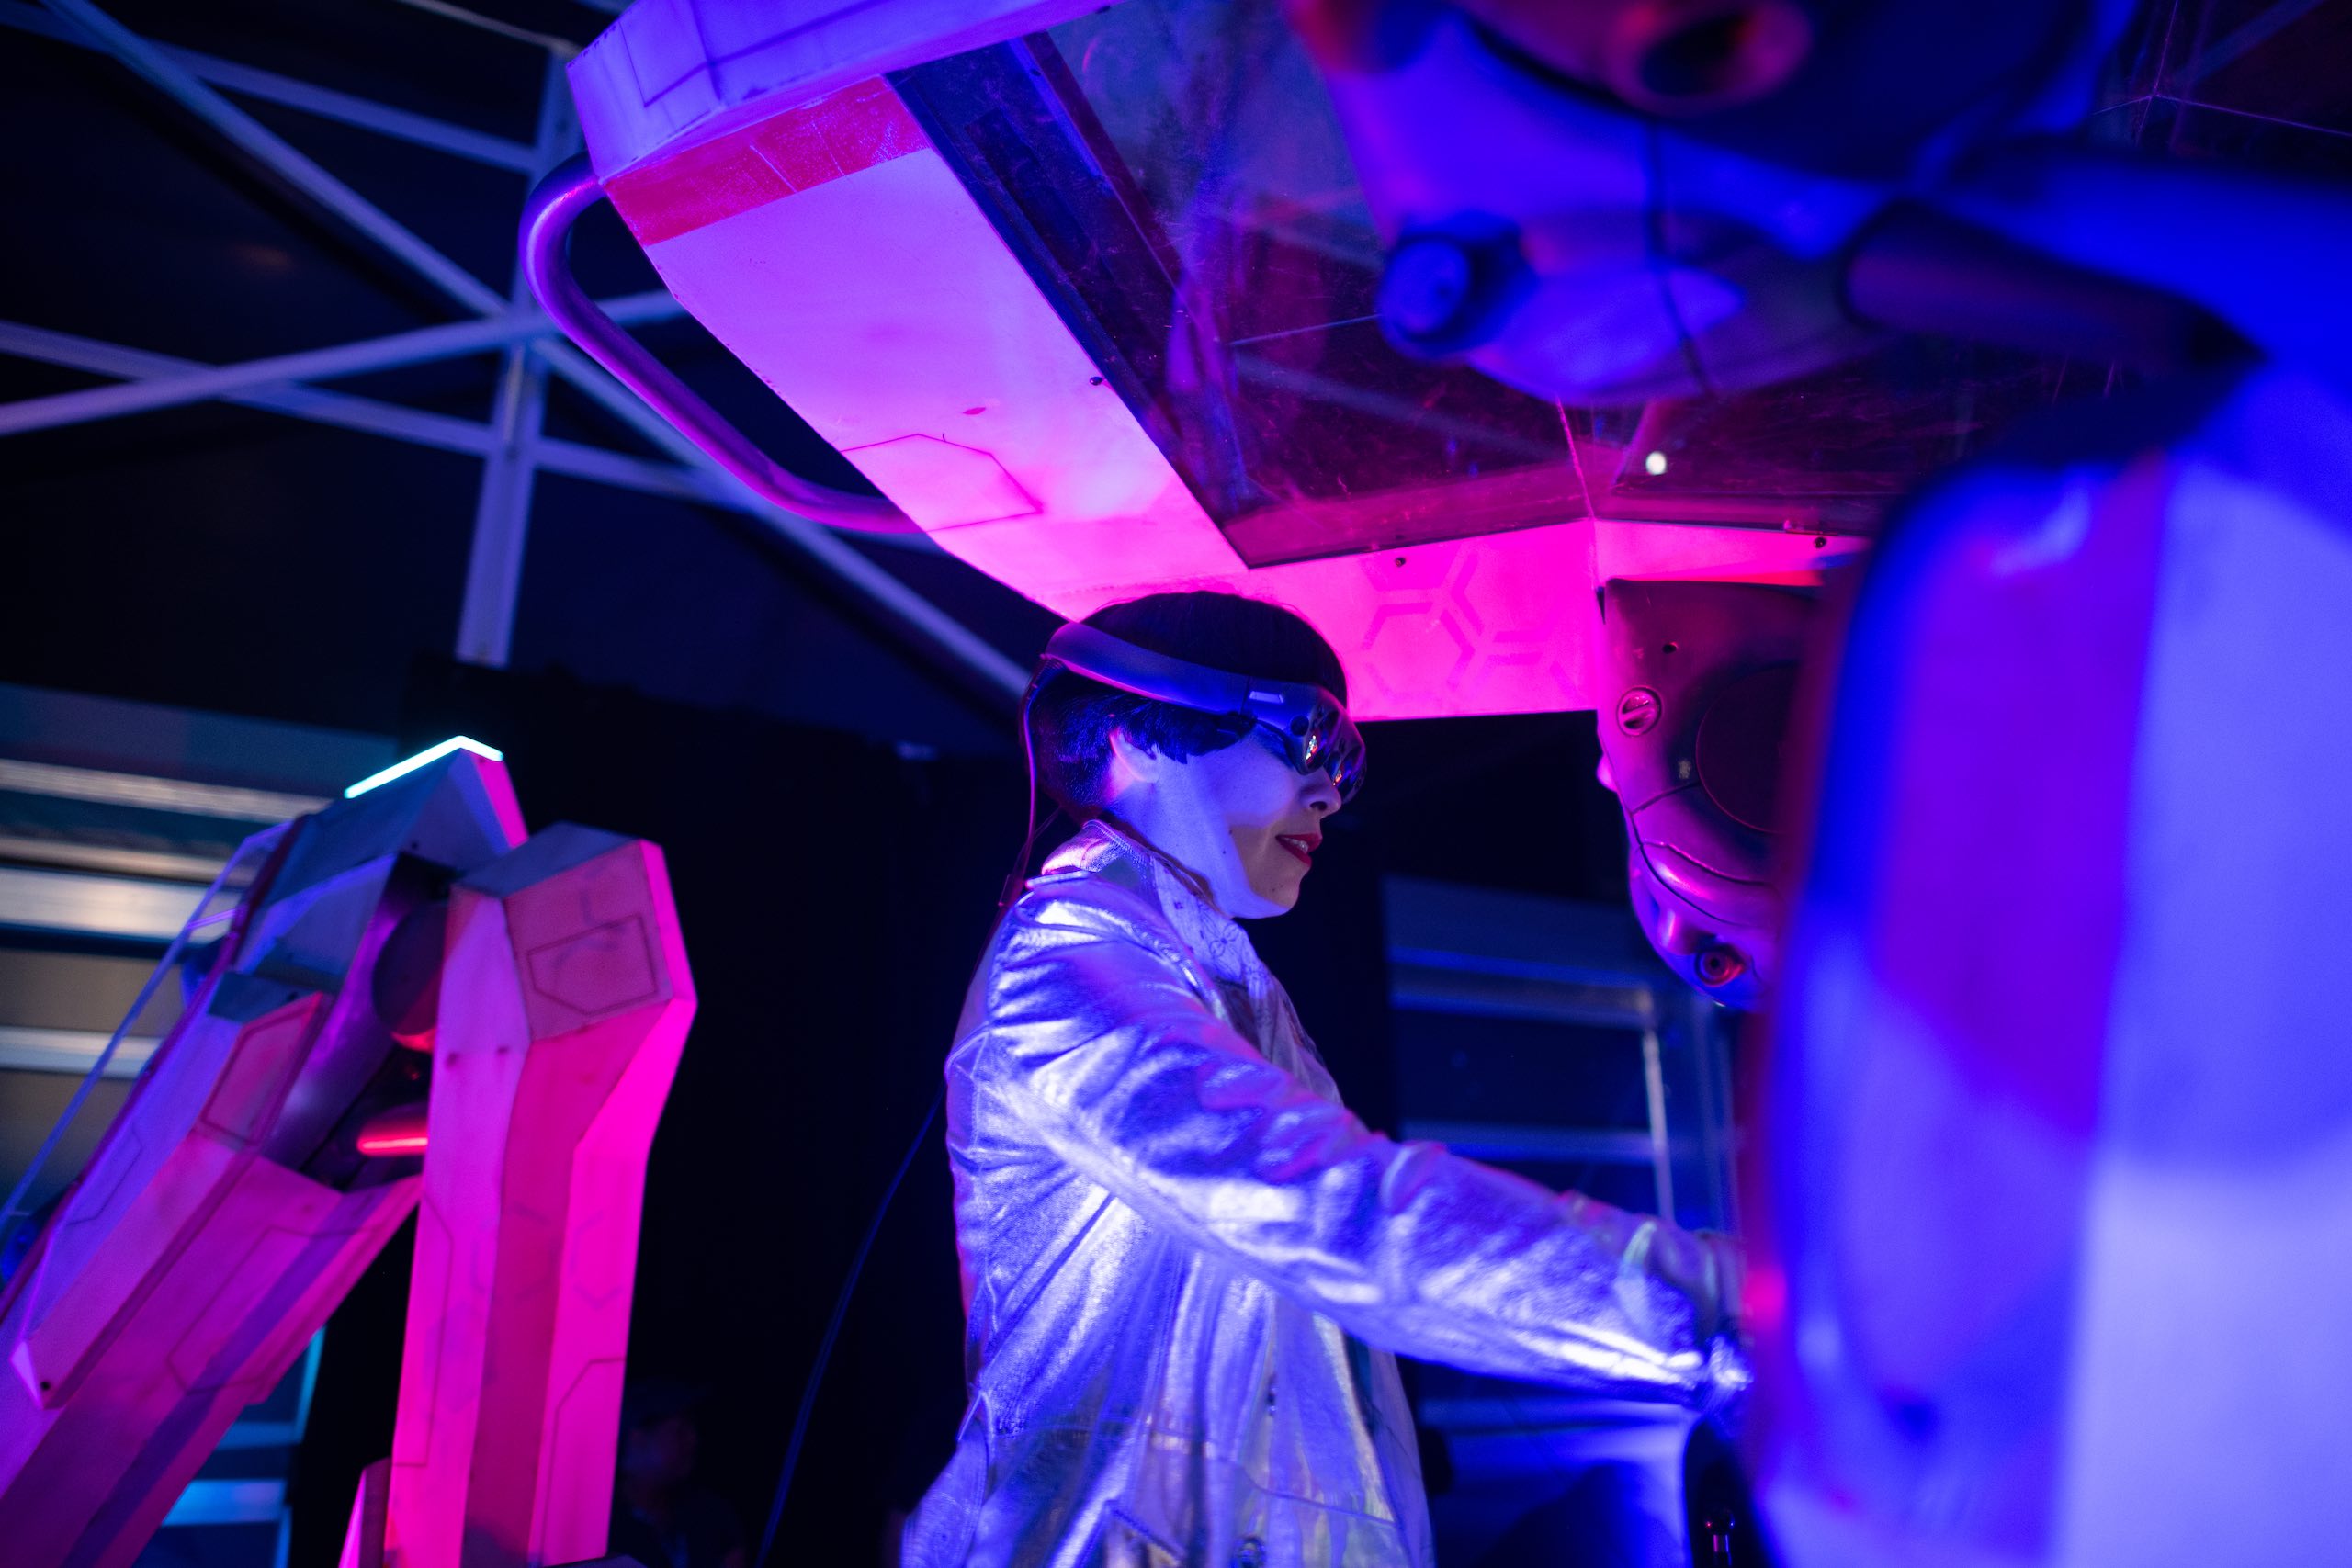 Side profile of woman using a console wearing Lightwear equipment in a bluish and reddish lights